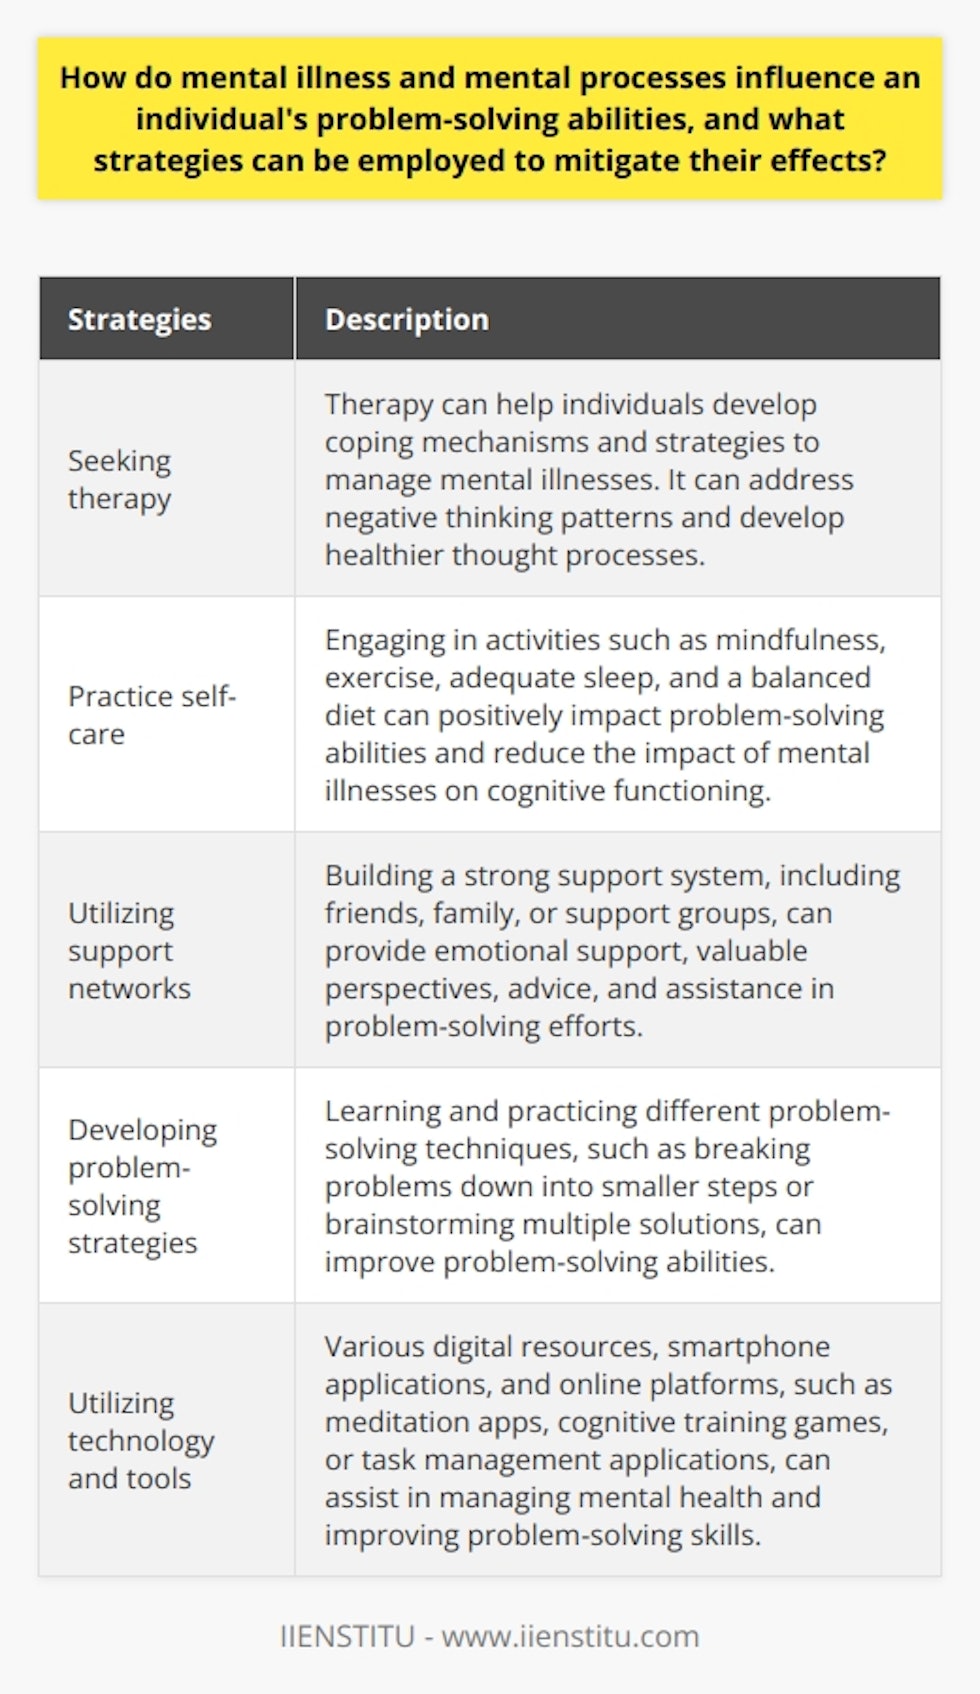 Some strategies that can be employed to mitigate the effects of mental illness and mental processes on problem-solving abilities include:1. Seeking therapy: Therapy can help individuals develop coping mechanisms and strategies to manage their mental illnesses. Cognitive Behavioral Therapy (CBT) and other evidence-based approaches can assist in improving problem-solving skills by addressing negative thinking patterns and developing healthier thought processes.2. Practice self-care: Engaging in activities that promote mental well-being, such as practicing mindfulness, exercising regularly, getting enough sleep, and maintaining a balanced diet, can have a positive impact on problem-solving abilities. Taking care of one's overall health can help reduce the impact of mental illnesses on cognitive functioning.3. Utilizing support networks: Building a strong support system can provide individuals with the emotional support and encouragement they need to overcome challenges. Relying on friends, family, or support groups can provide valuable perspectives, advice, and assistance in problem-solving efforts.4. Developing problem-solving strategies: Learning and practicing different problem-solving techniques, such as breaking problems down into smaller, manageable steps, brainstorming multiple solutions, or seeking advice from others, can improve problem-solving abilities. This can help individuals approach problems more effectively, regardless of the impact of mental illnesses.5. Utilizing technology and tools: There are various digital resources, smartphone applications, and online platforms available that can assist individuals in managing their mental health and improving problem-solving skills. These tools may include meditation apps, cognitive training games, or task management applications, among others.Remember, it is crucial to consult with a mental health expert to address individual circumstances and receive personalized recommendations. The strategies mentioned here are general suggestions and may vary depending on each person's unique needs and preferences.